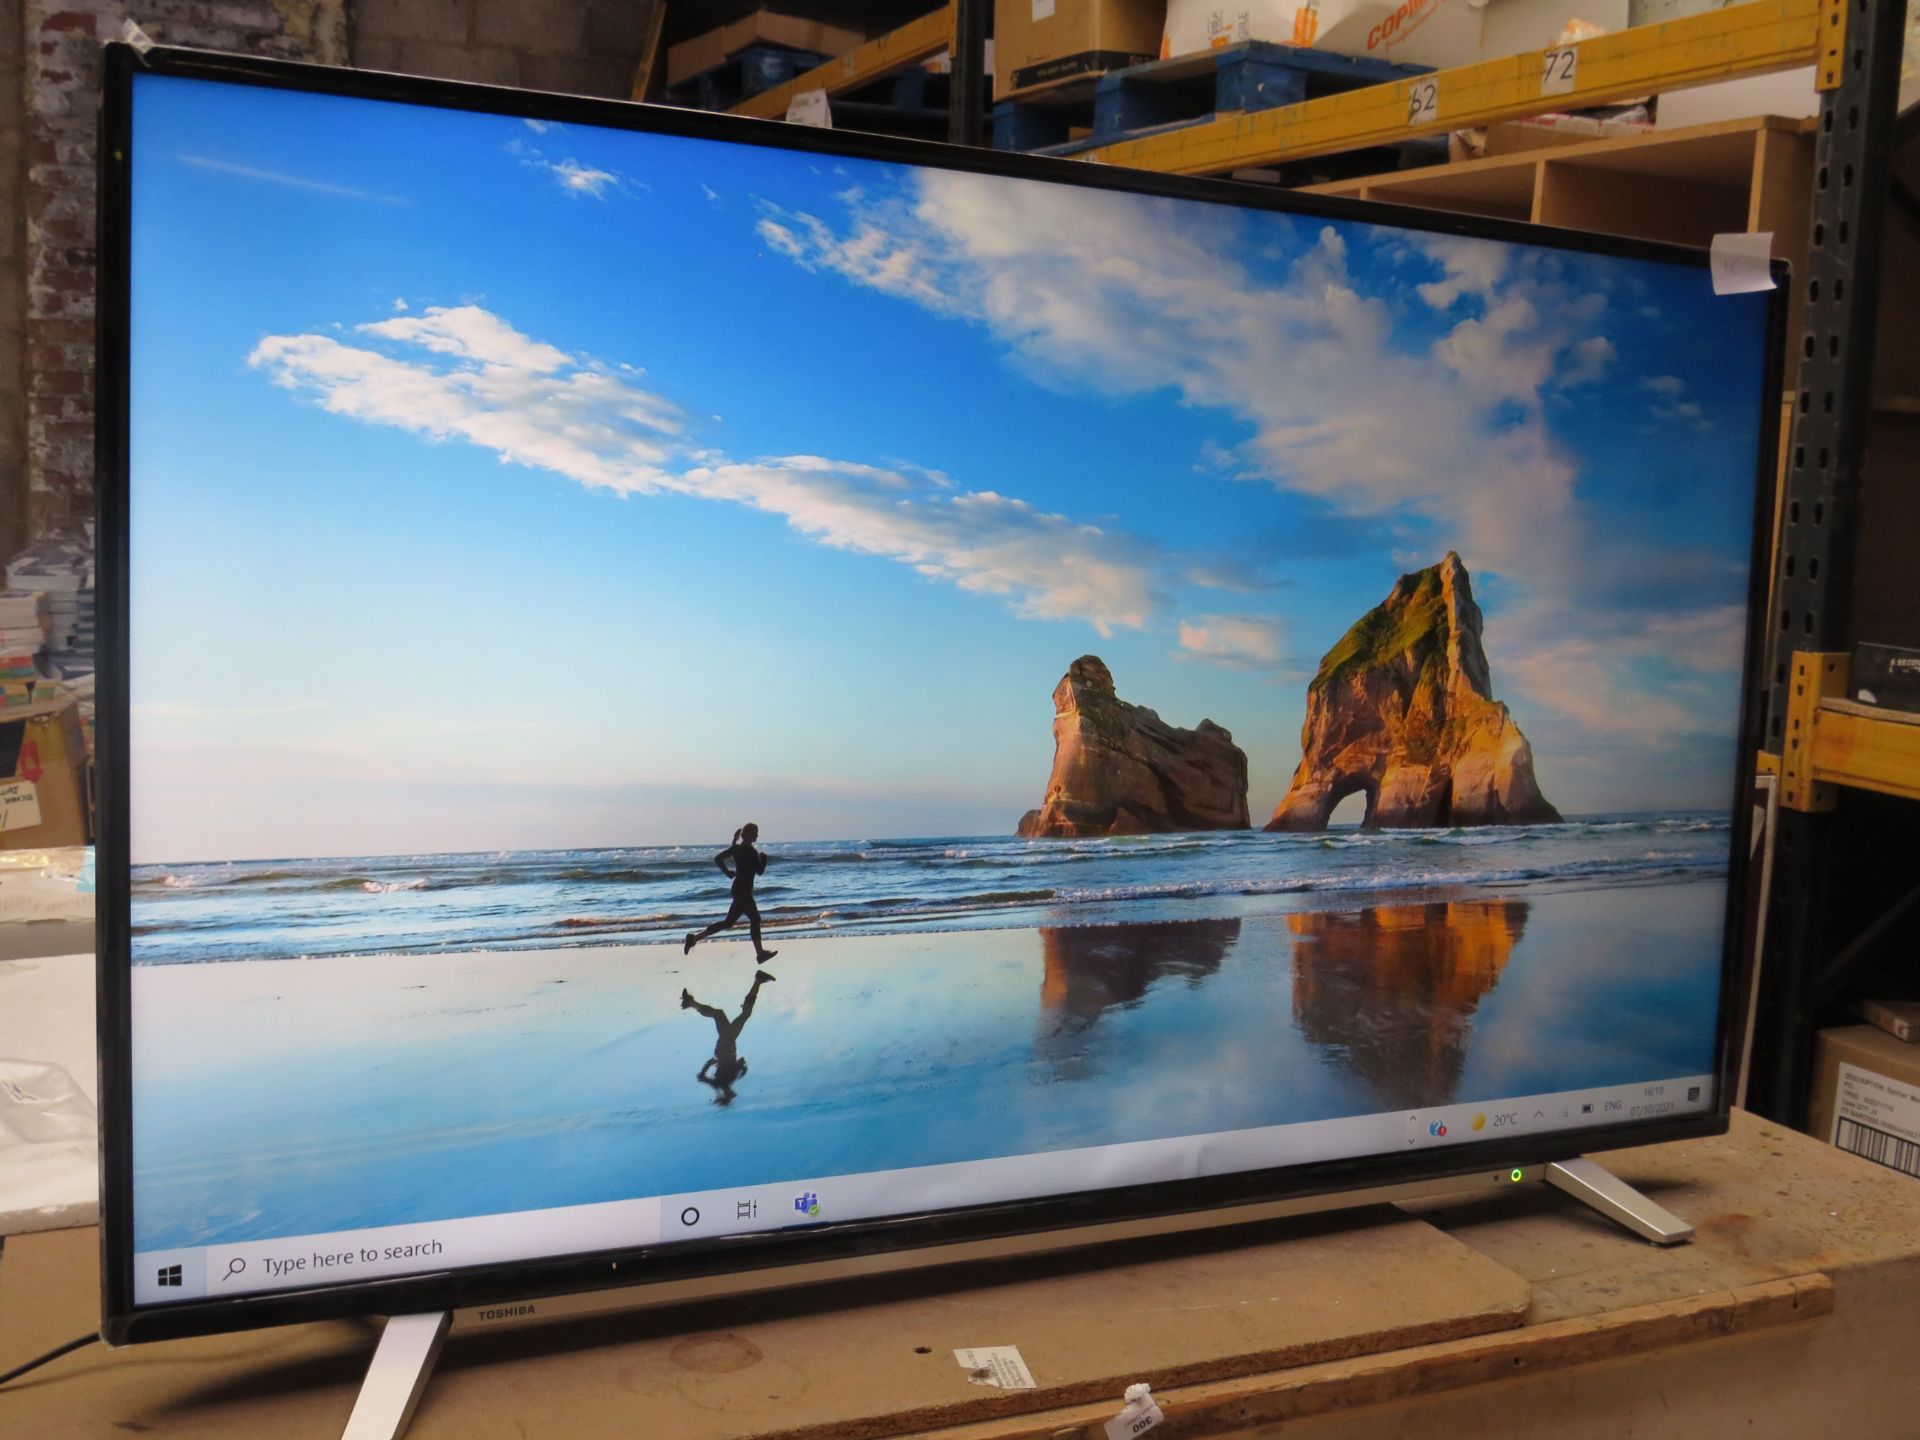 Toshiba 55" 4K HDR TV, tested working but display showing it has a bent near the bottom. Includes